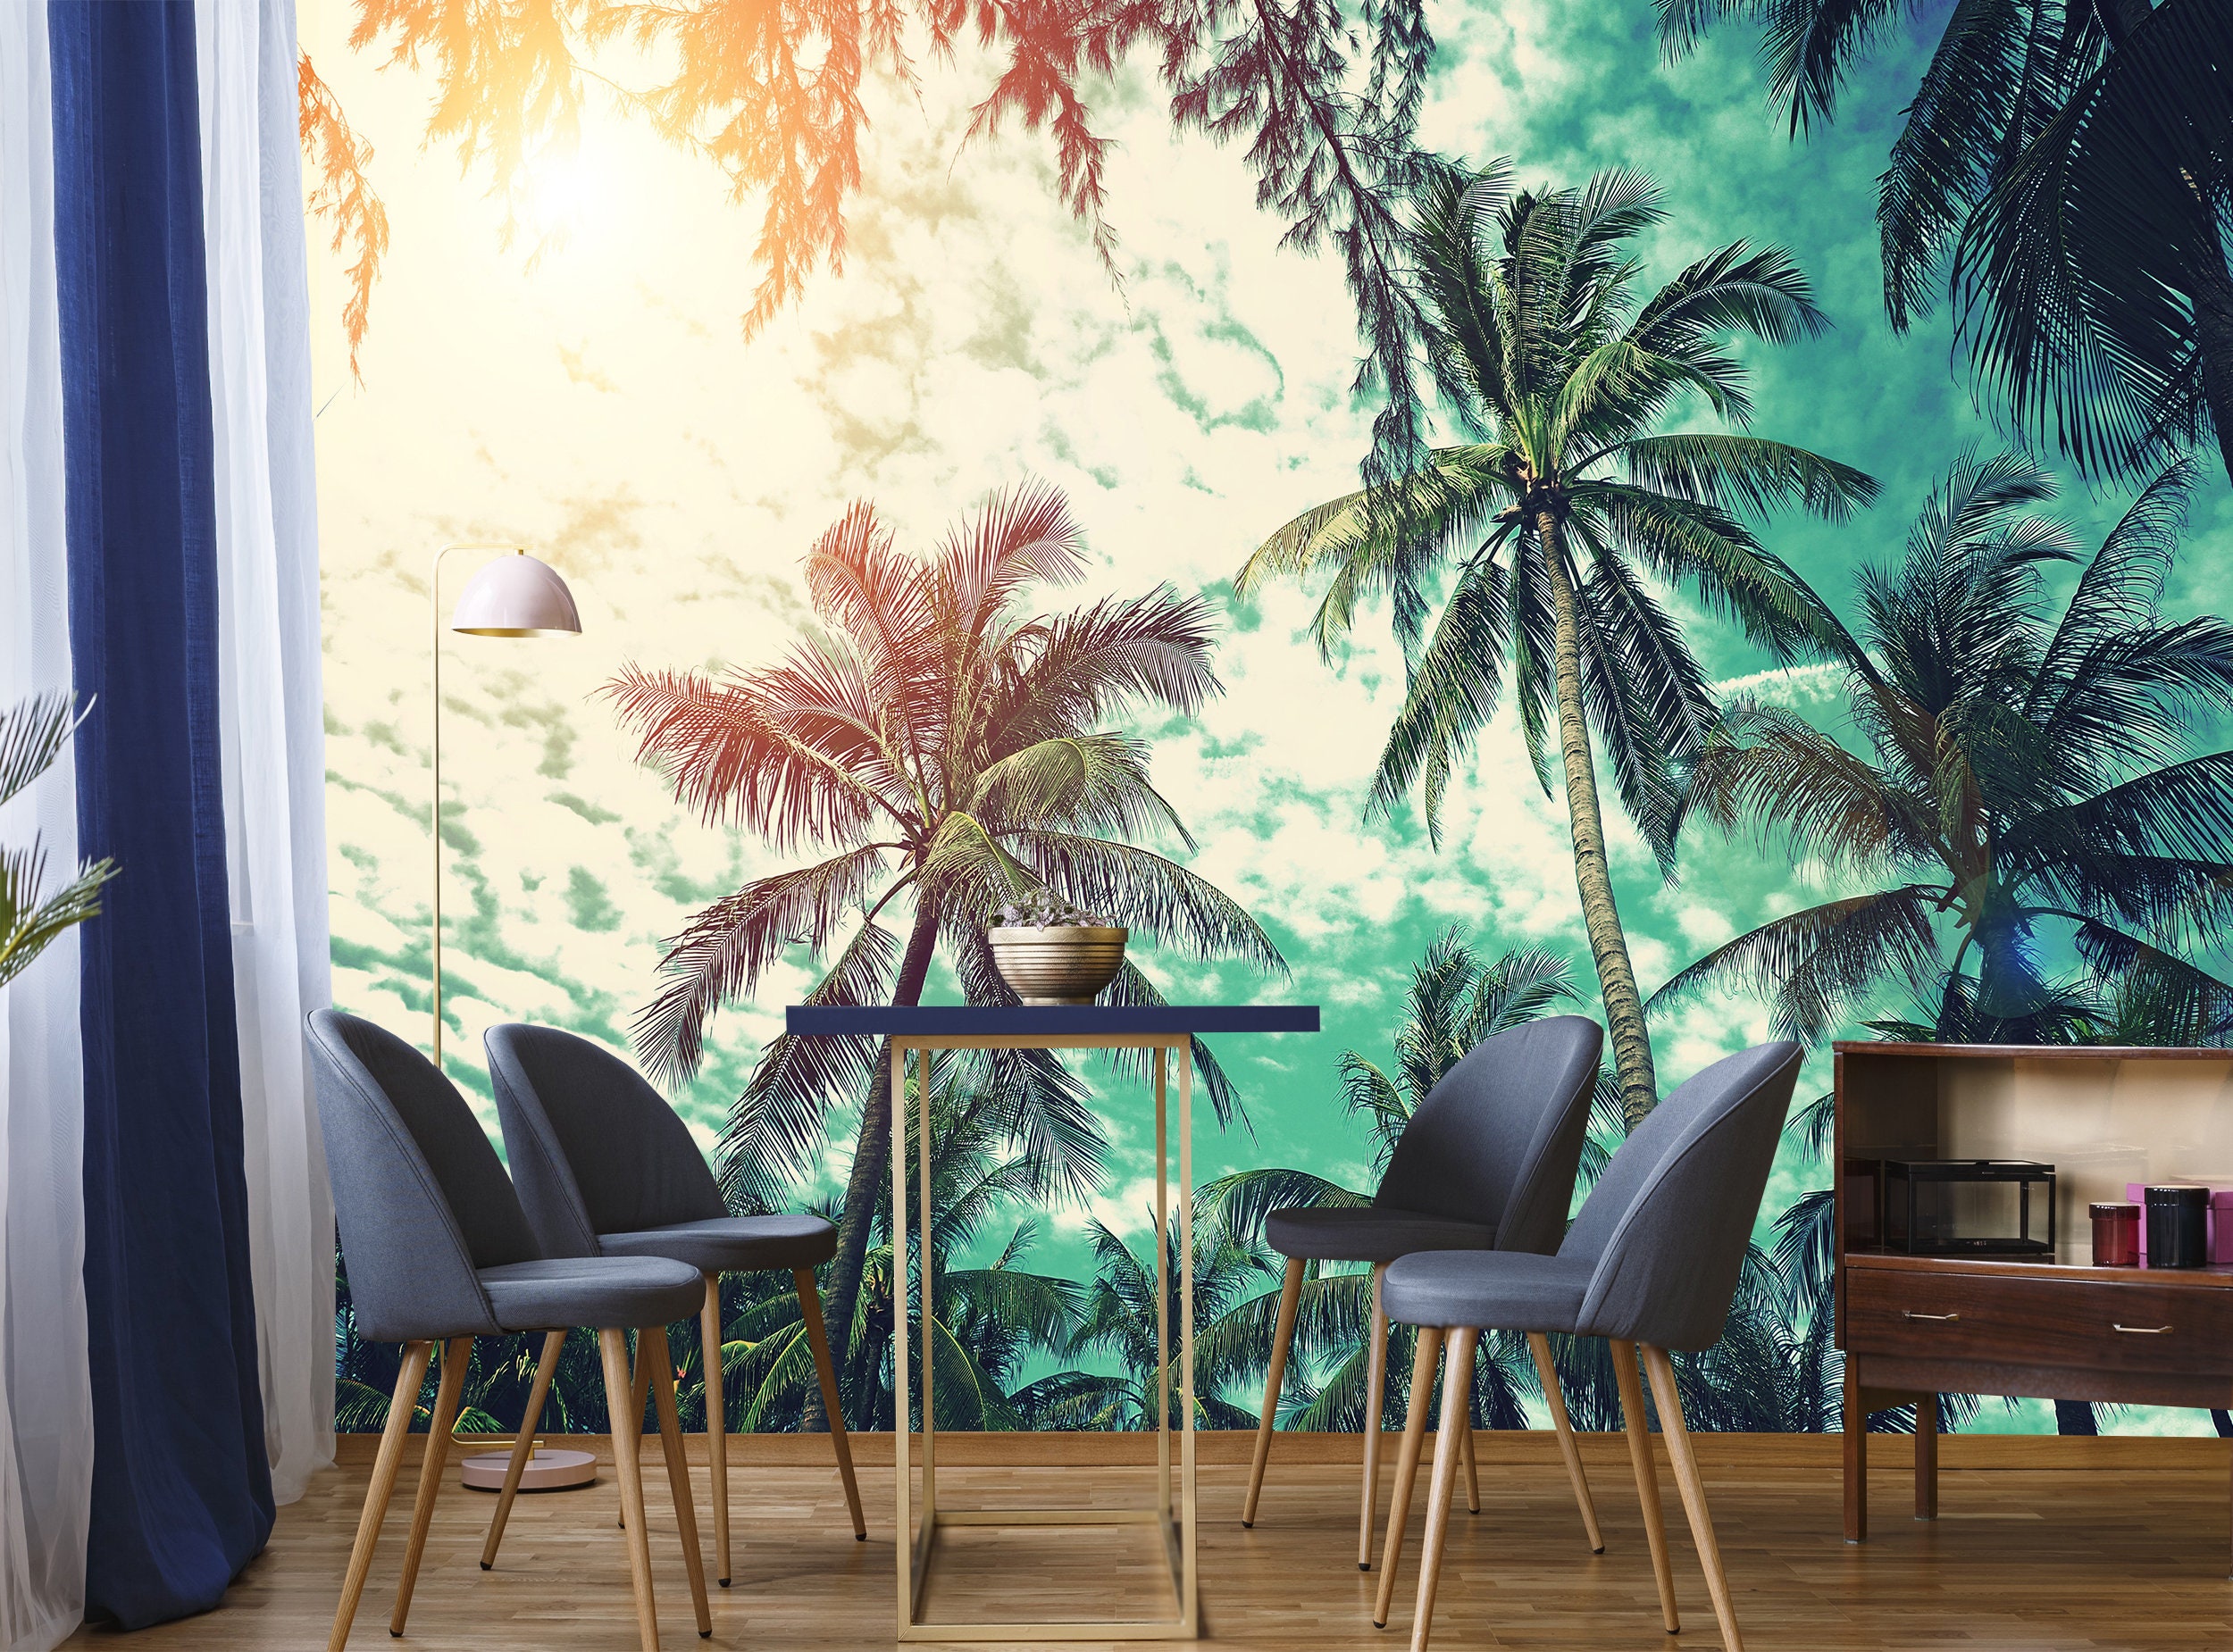 Palm Tree Tropical Holiday Home Vinyl Wall Decal Sticker Room Decor Crafts  FL16